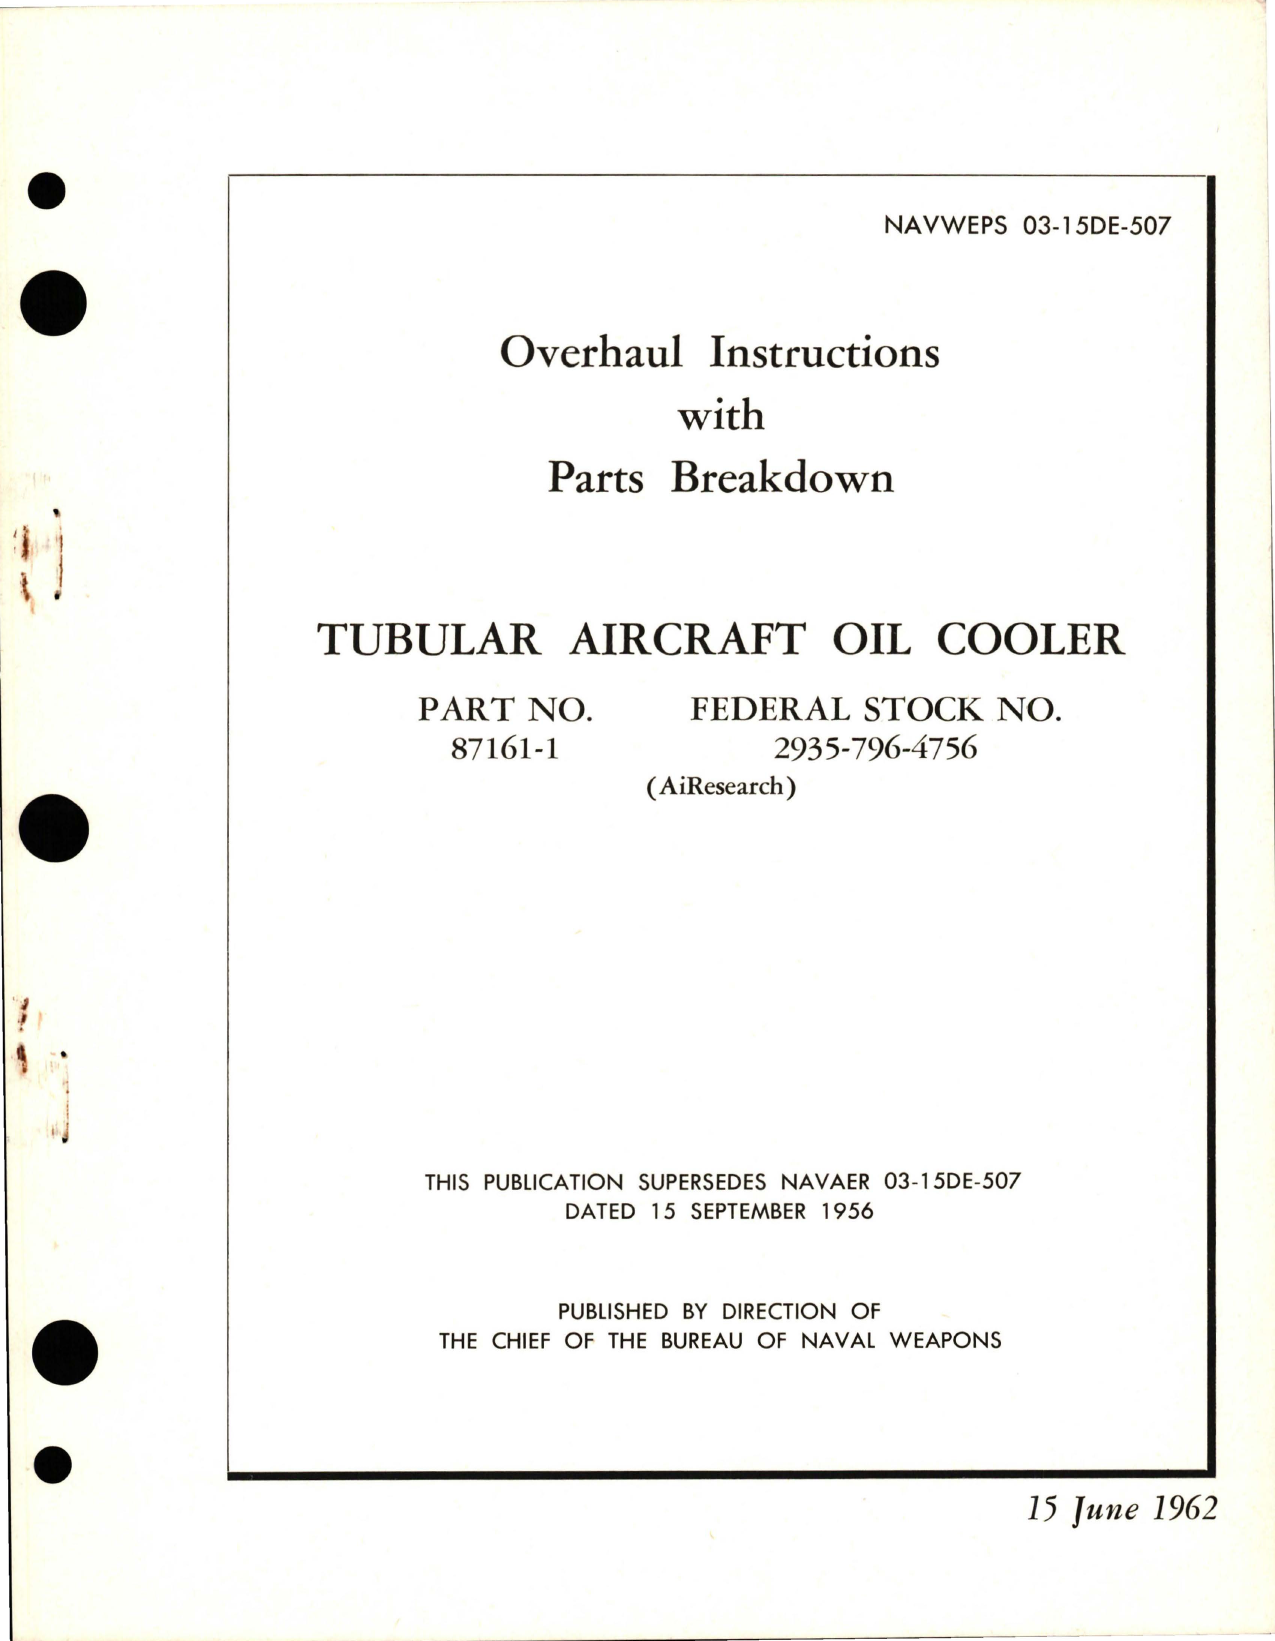 Sample page 1 from AirCorps Library document: Overhaul Instructions with Parts Breakdown for Tubular Oil Cooler - Part 87161-1